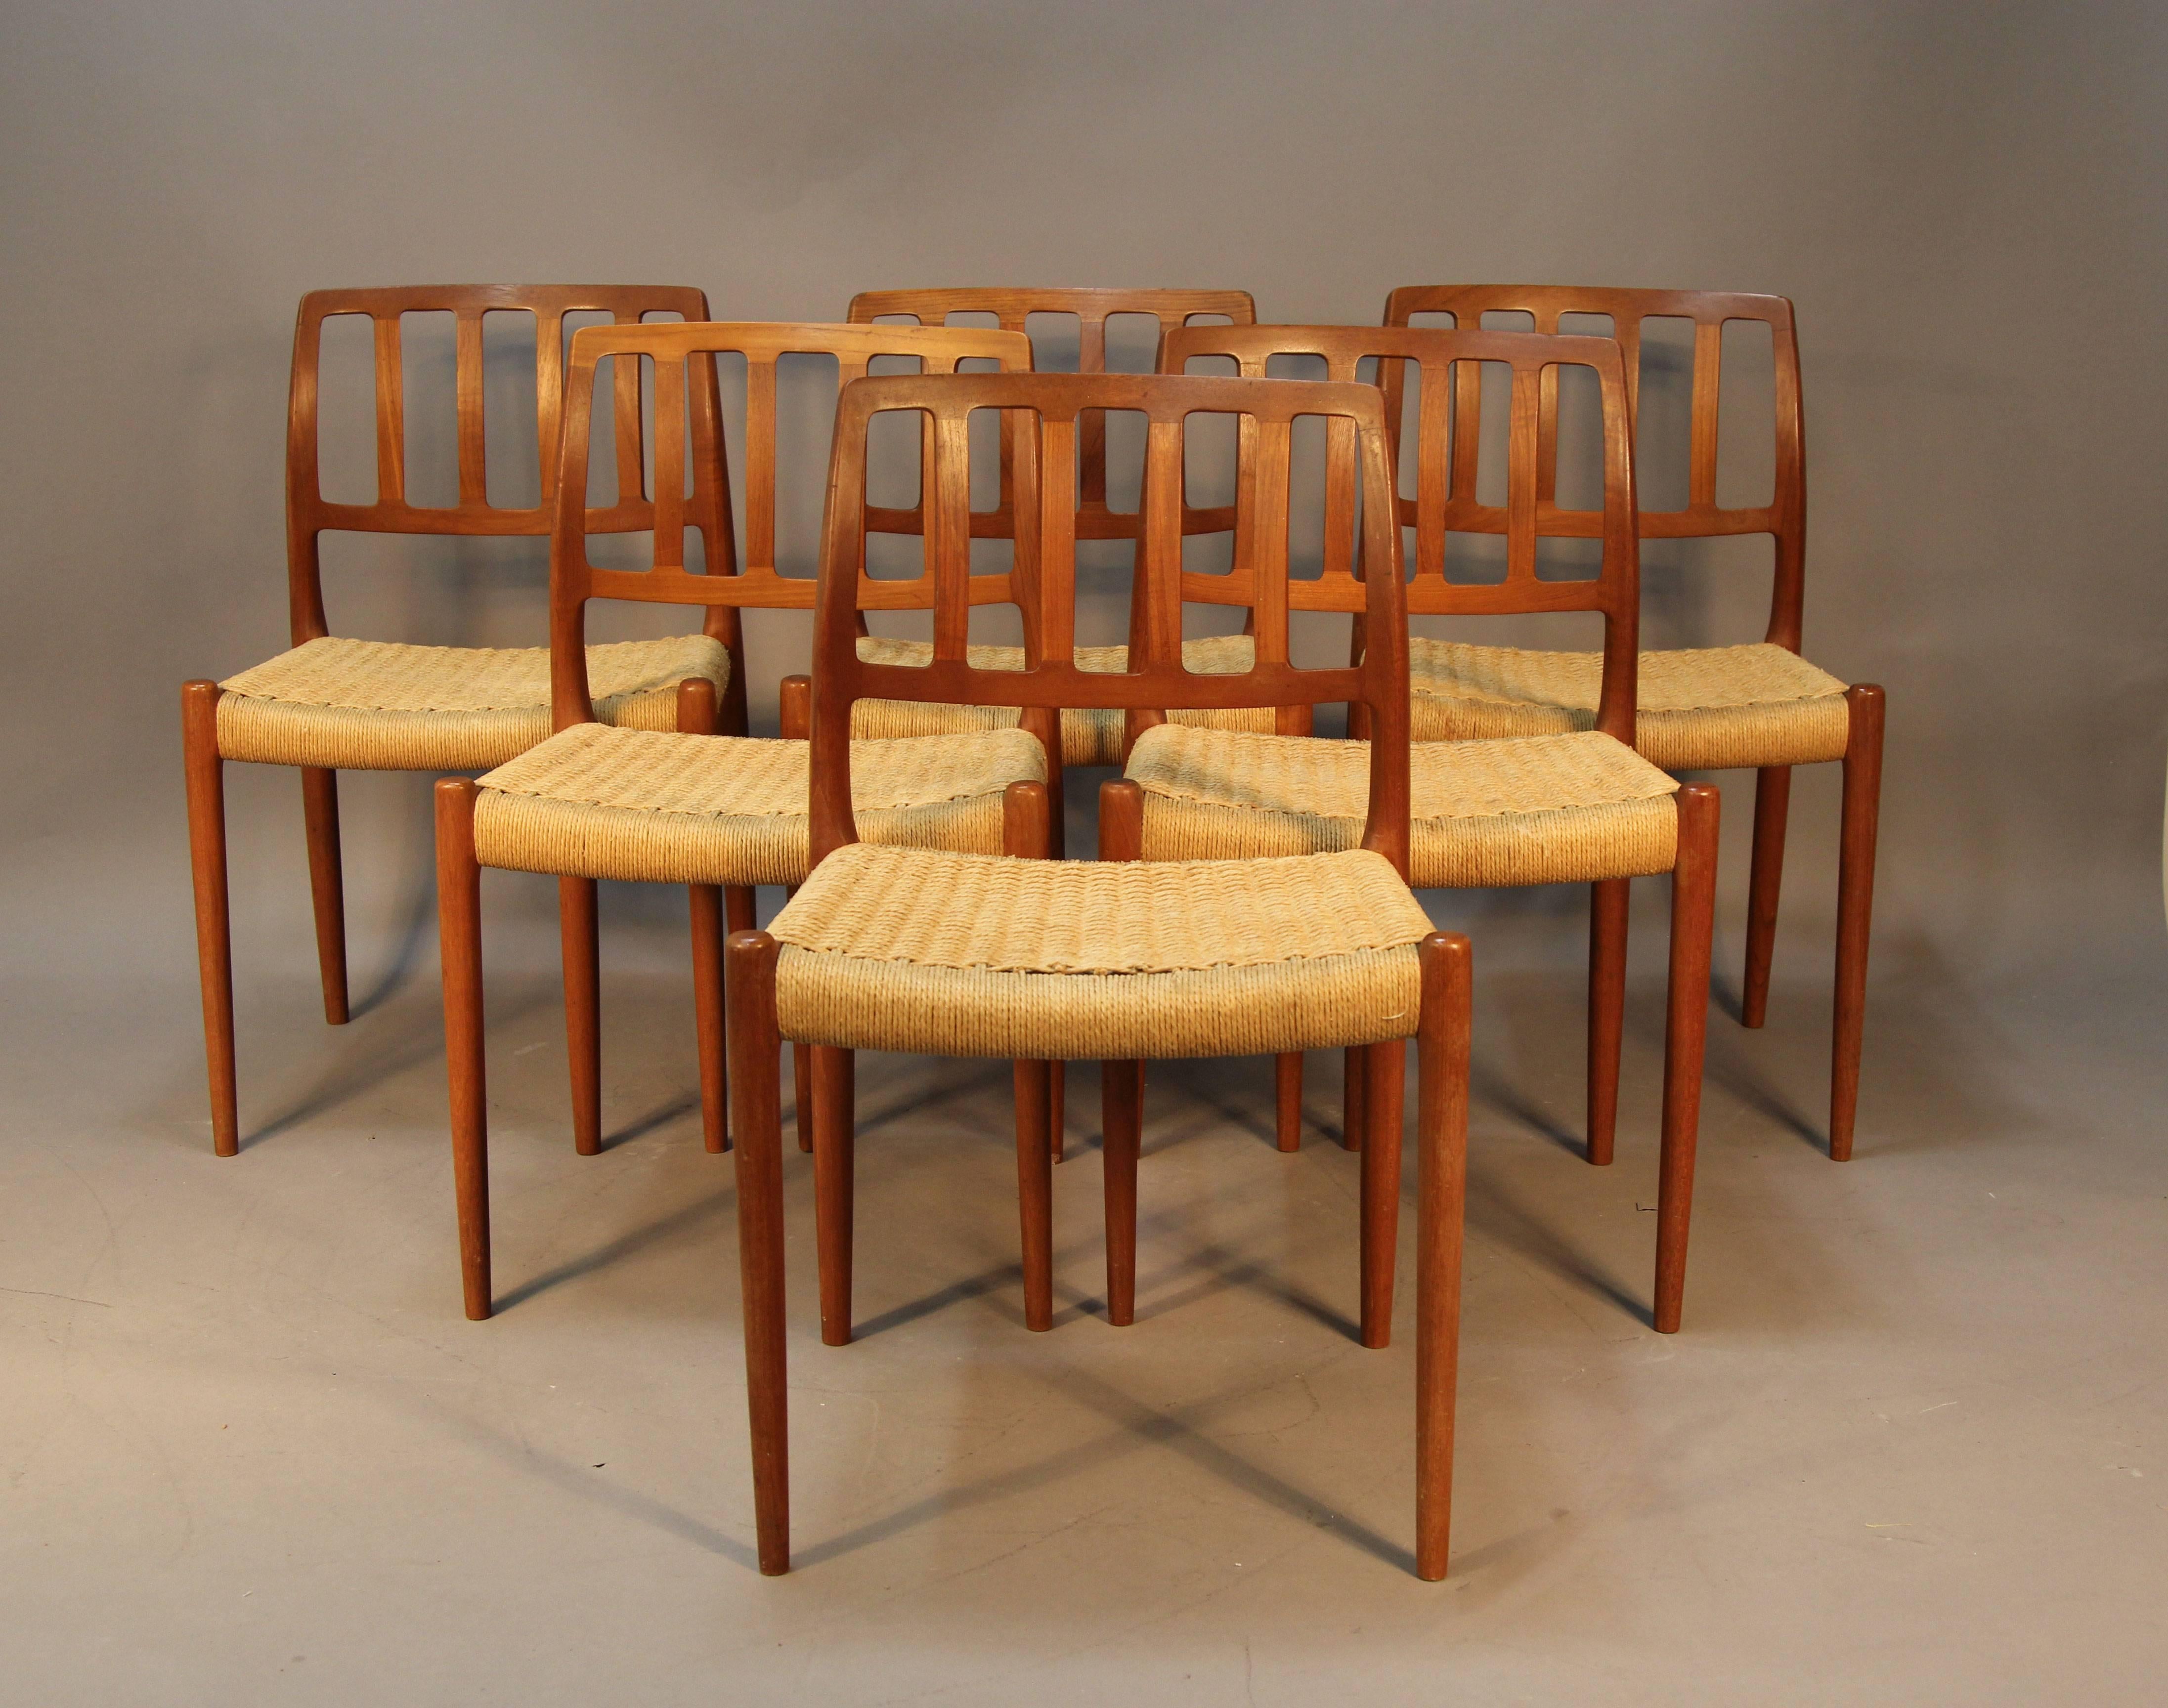 Set of six teak dining chairs with Danish paper chord seats. Stamped under seats. Niels Otto Møller for J. L. Møller. Excellent original condition, some light wear from use. Original, 1960s.